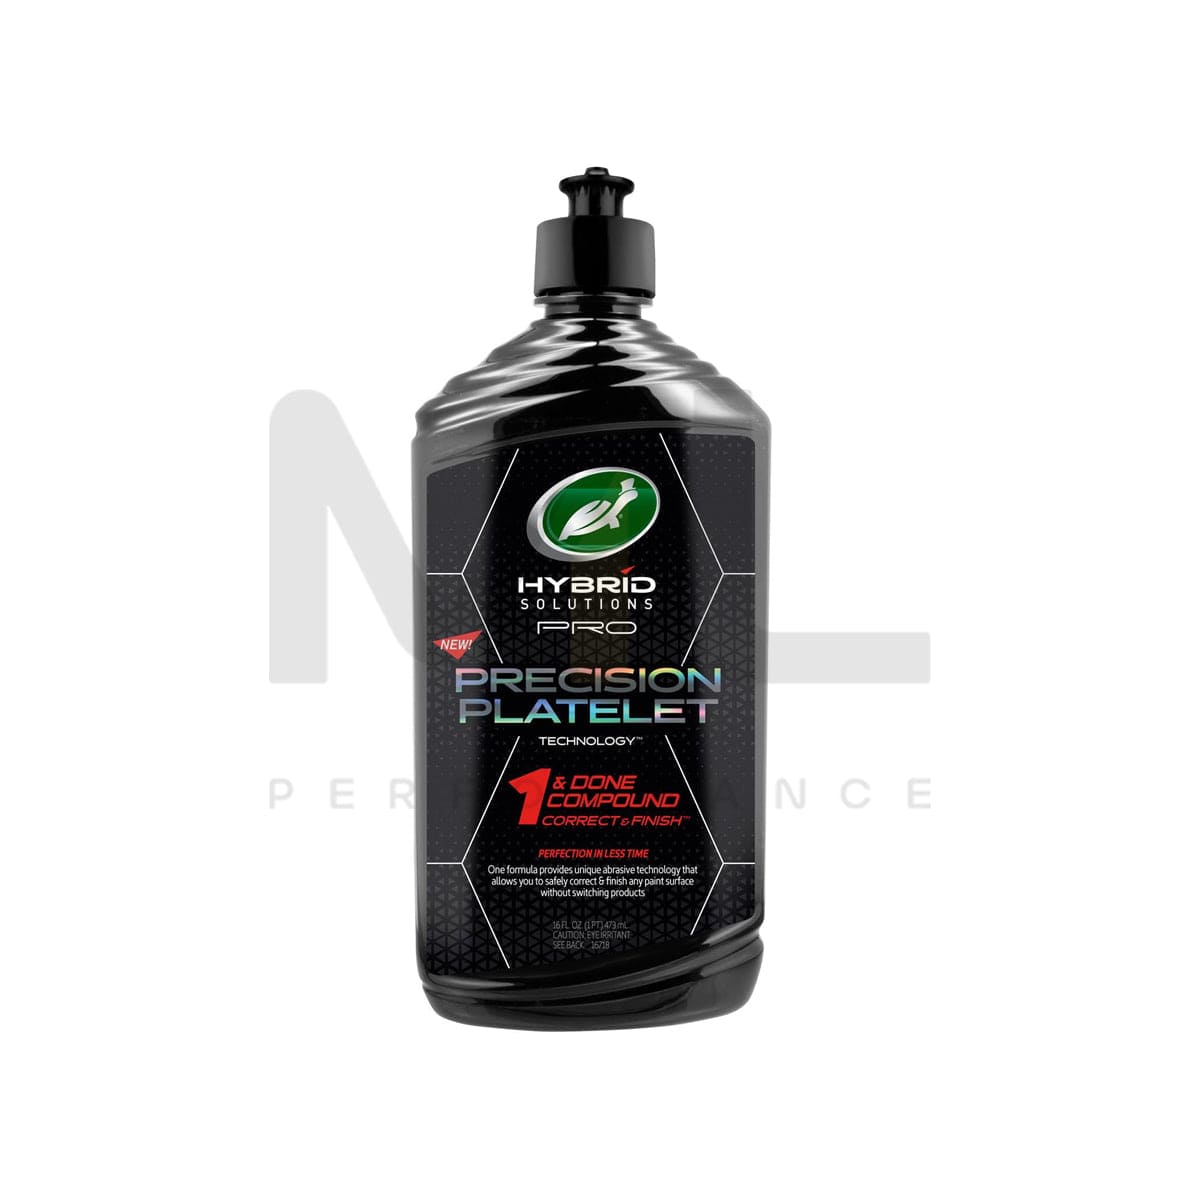 Turtle Wax Hybrid Solutions Pro 1 & Done Professional Polishing Compound Correct & Fin